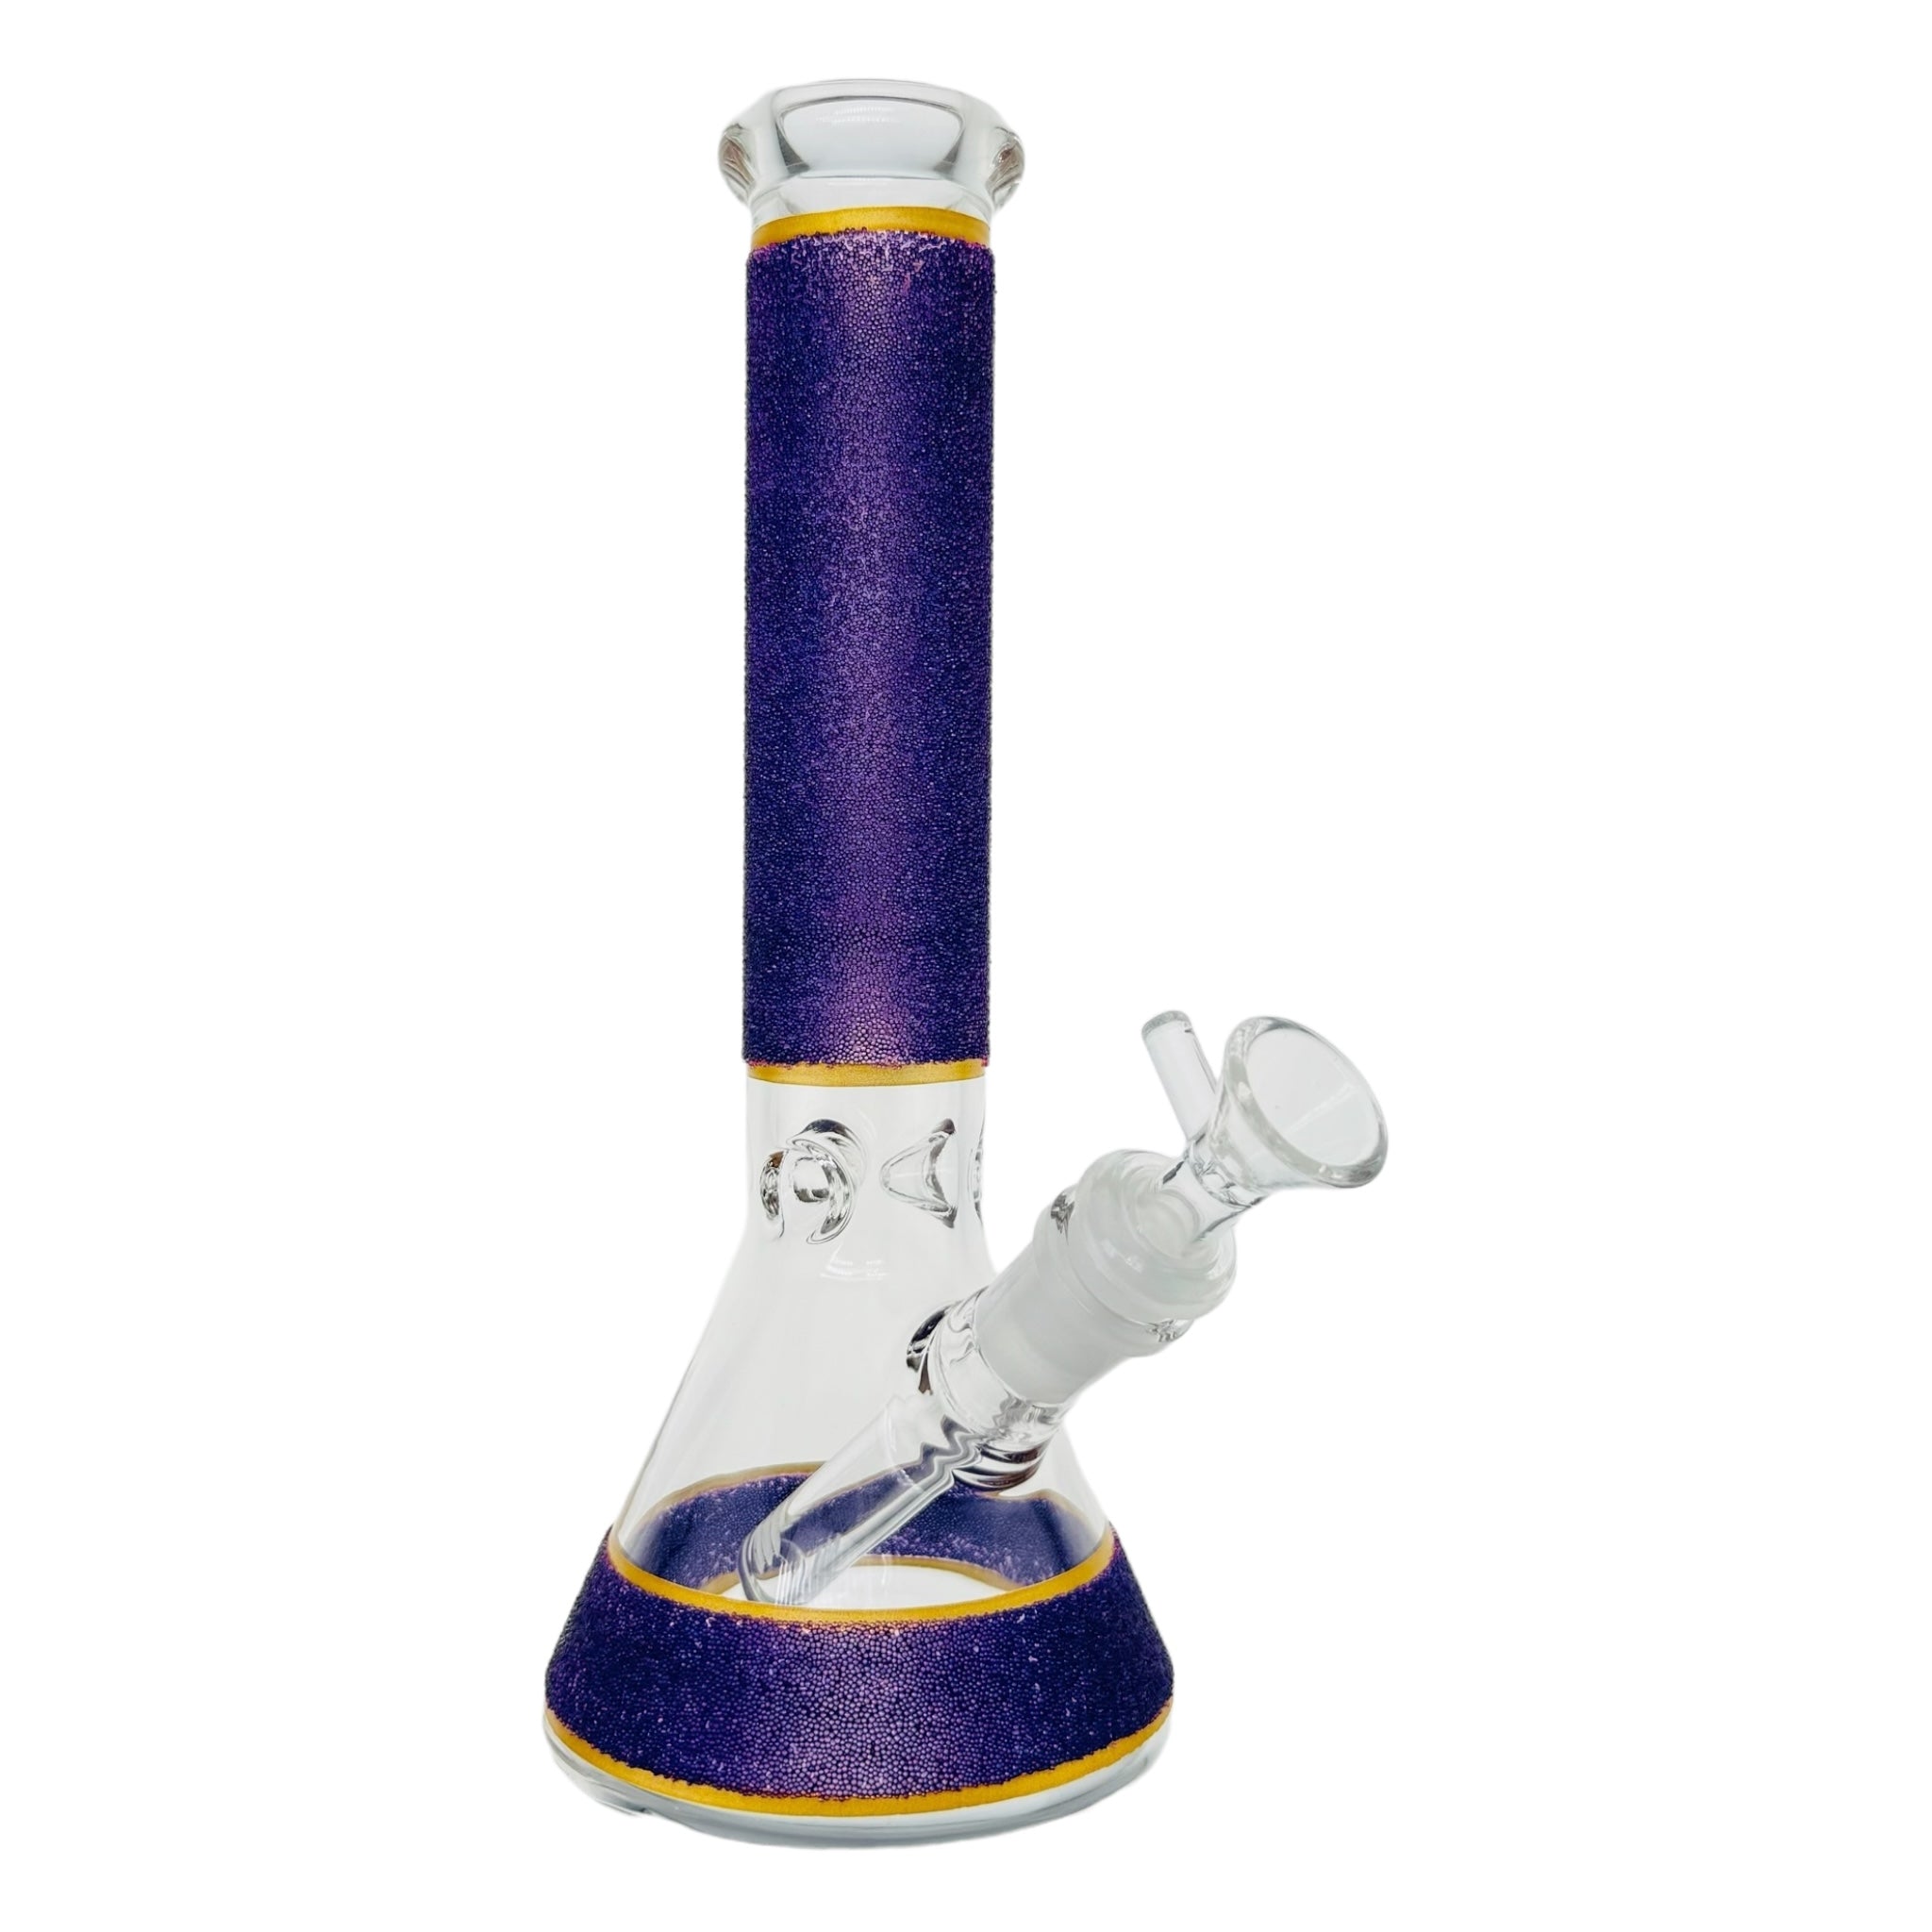 10 Inch Beaker Glass Bong With Purple Slag Frit And Gold Bands